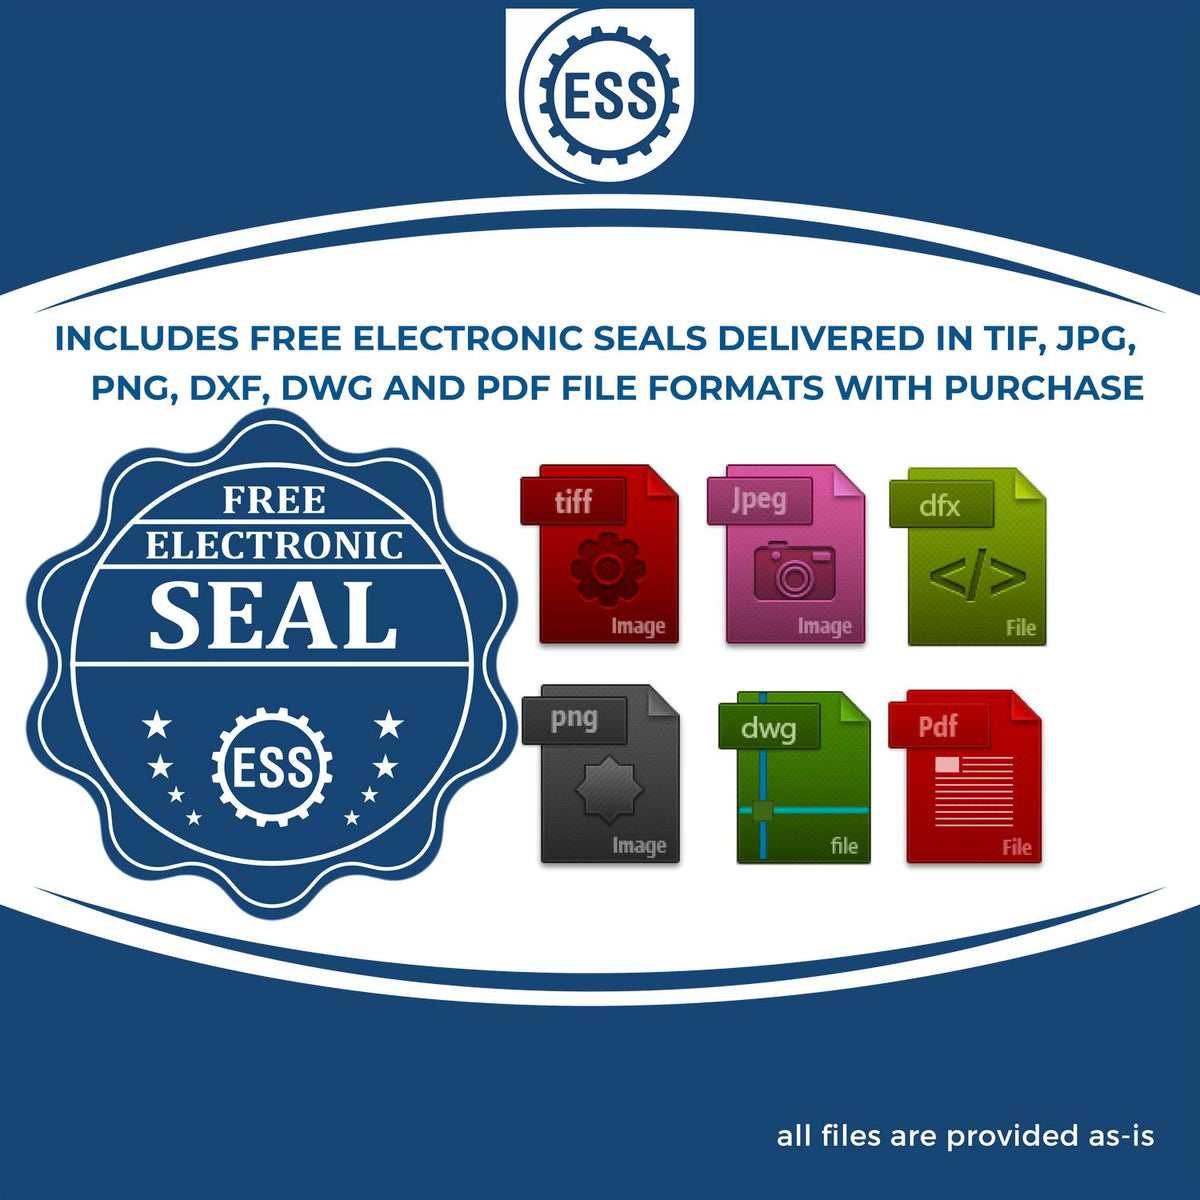 An infographic for the free electronic seal for the Gift Iowa Geologist Seal illustrating the different file type icons such as DXF, DWG, TIF, JPG and PNG.